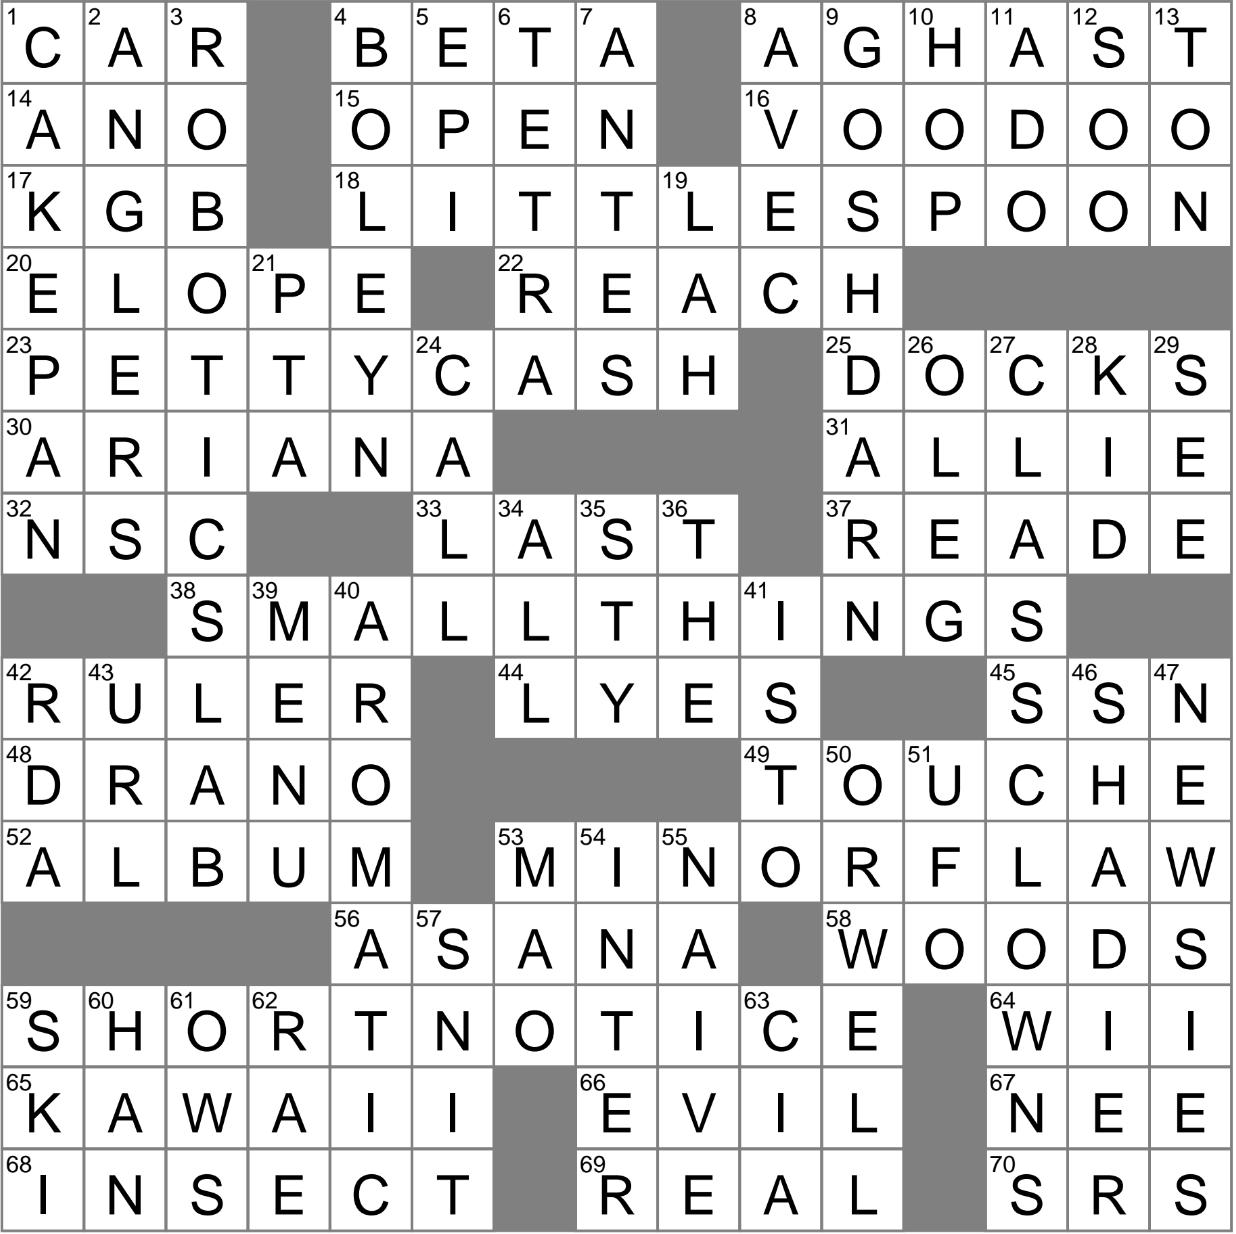 How can anyone know this? Times Crossword Lunacy 